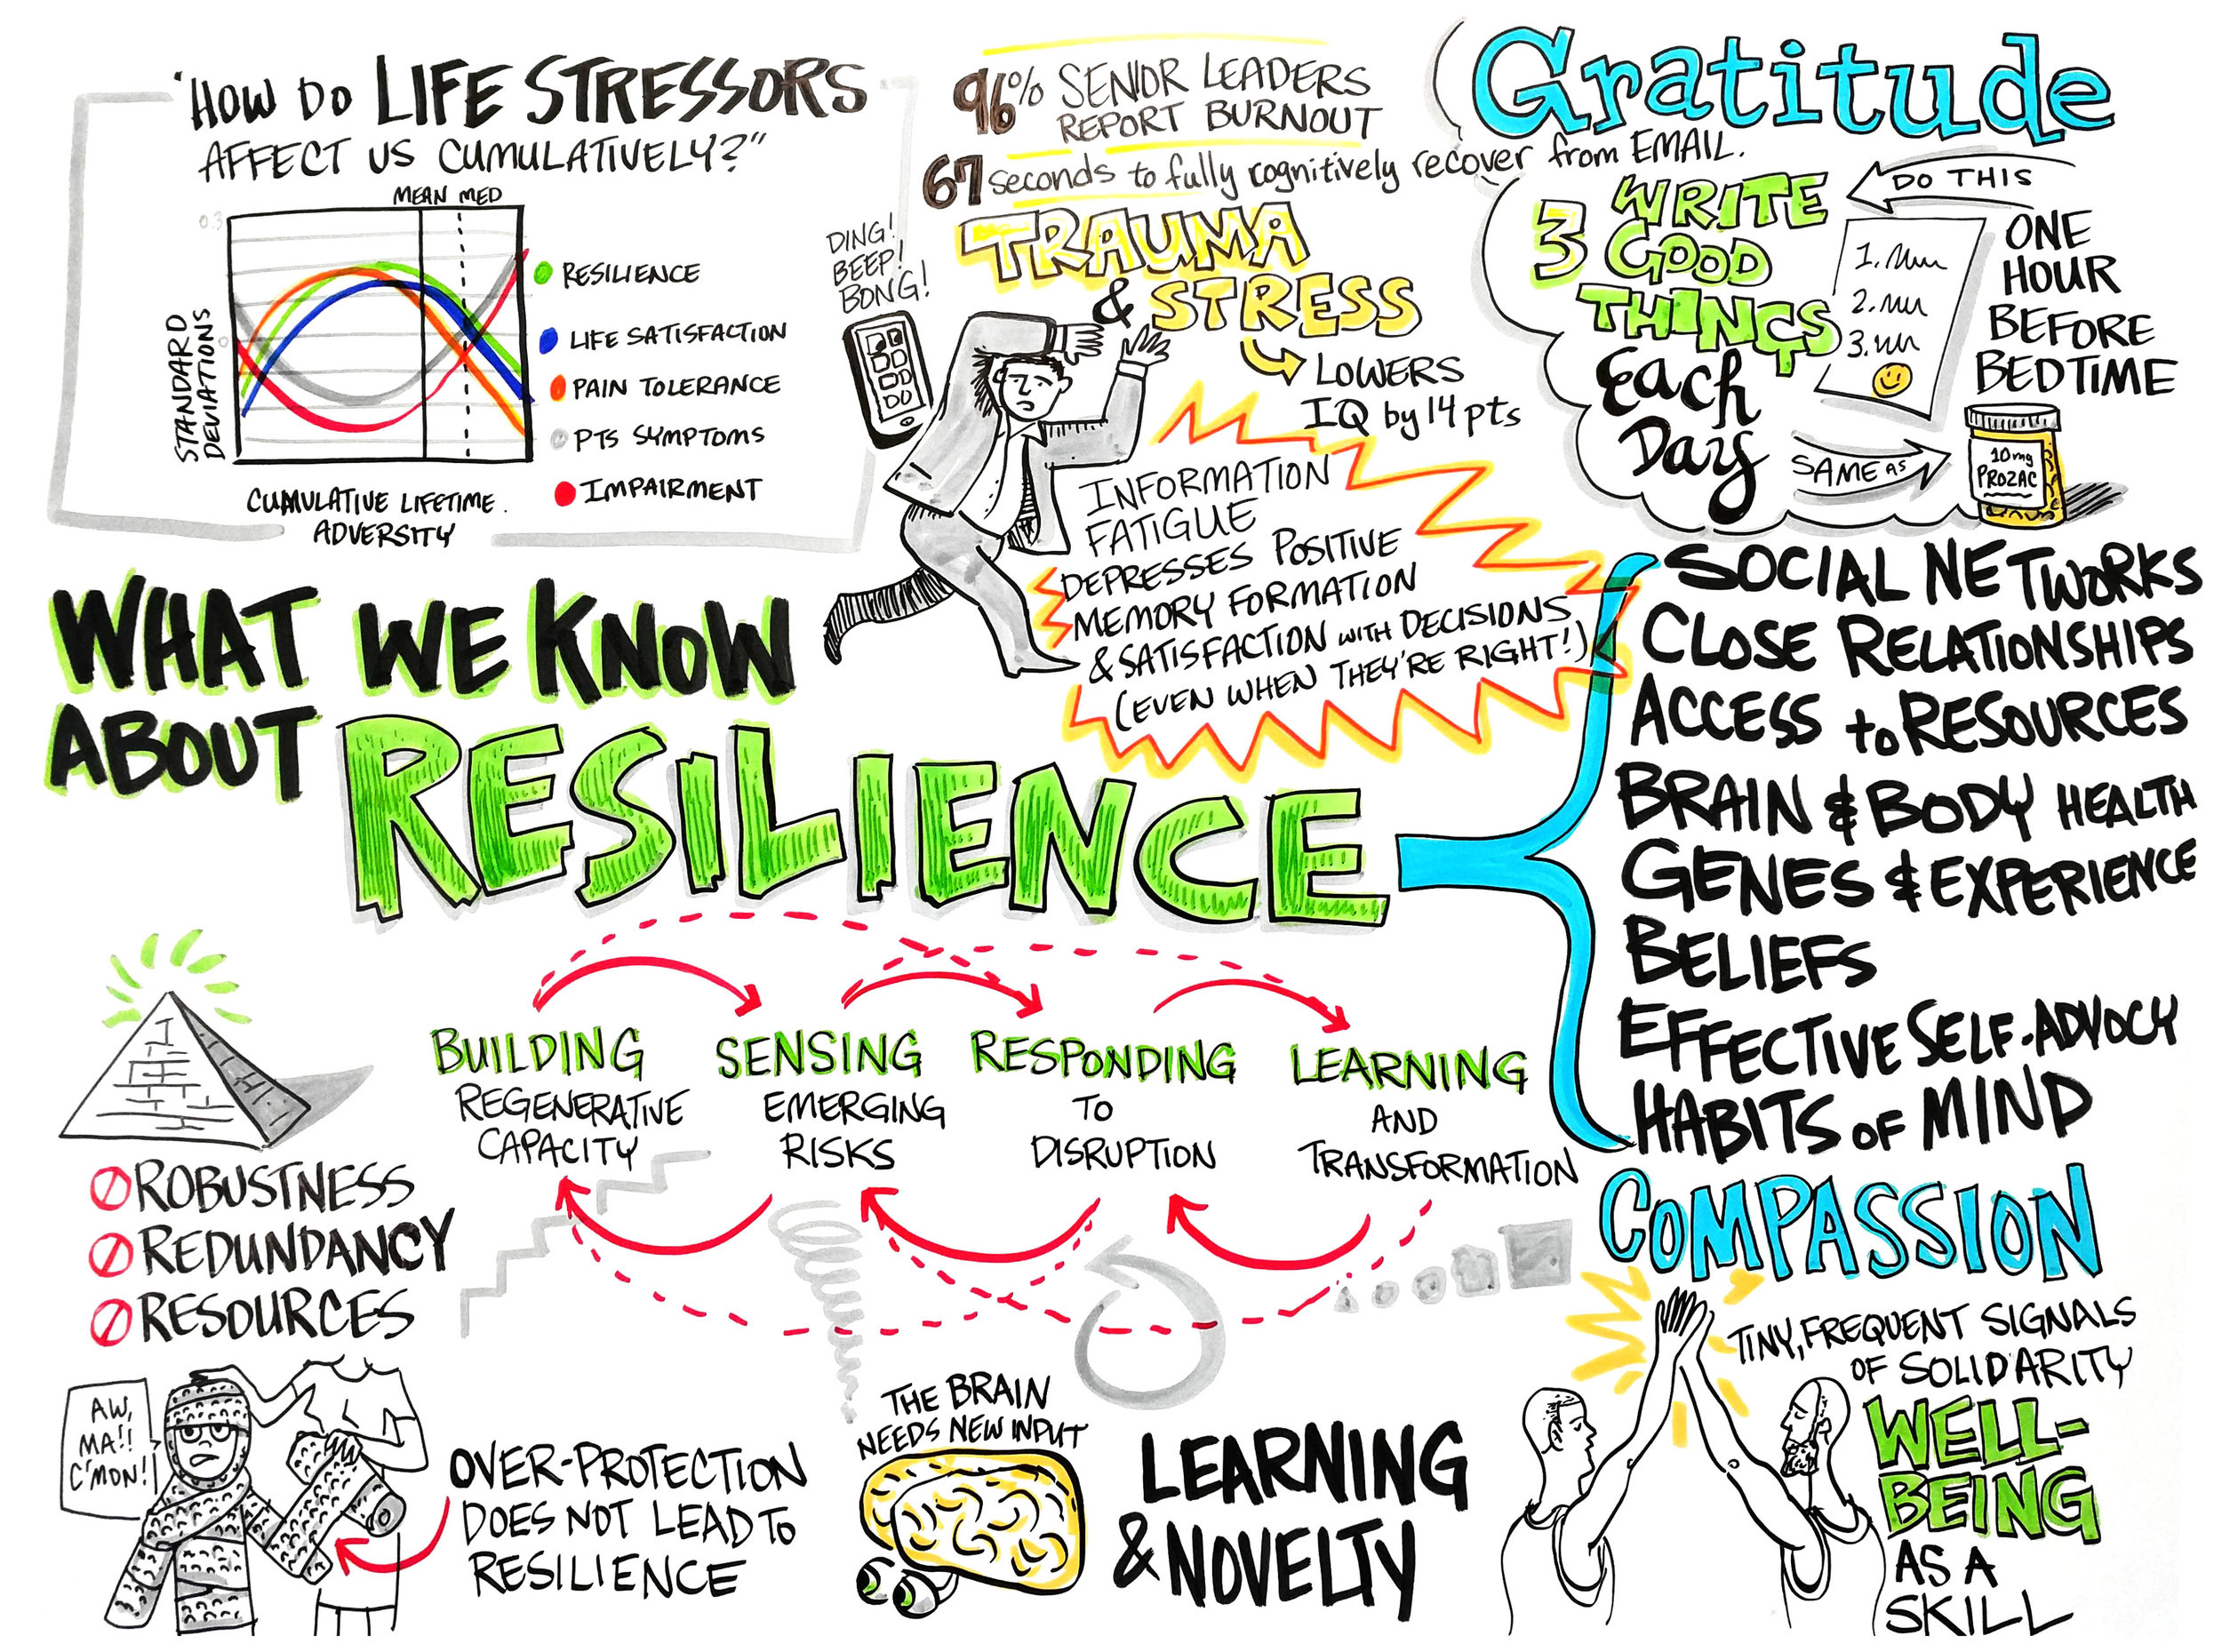 04-What-We-Know-About-Resilience.jpg